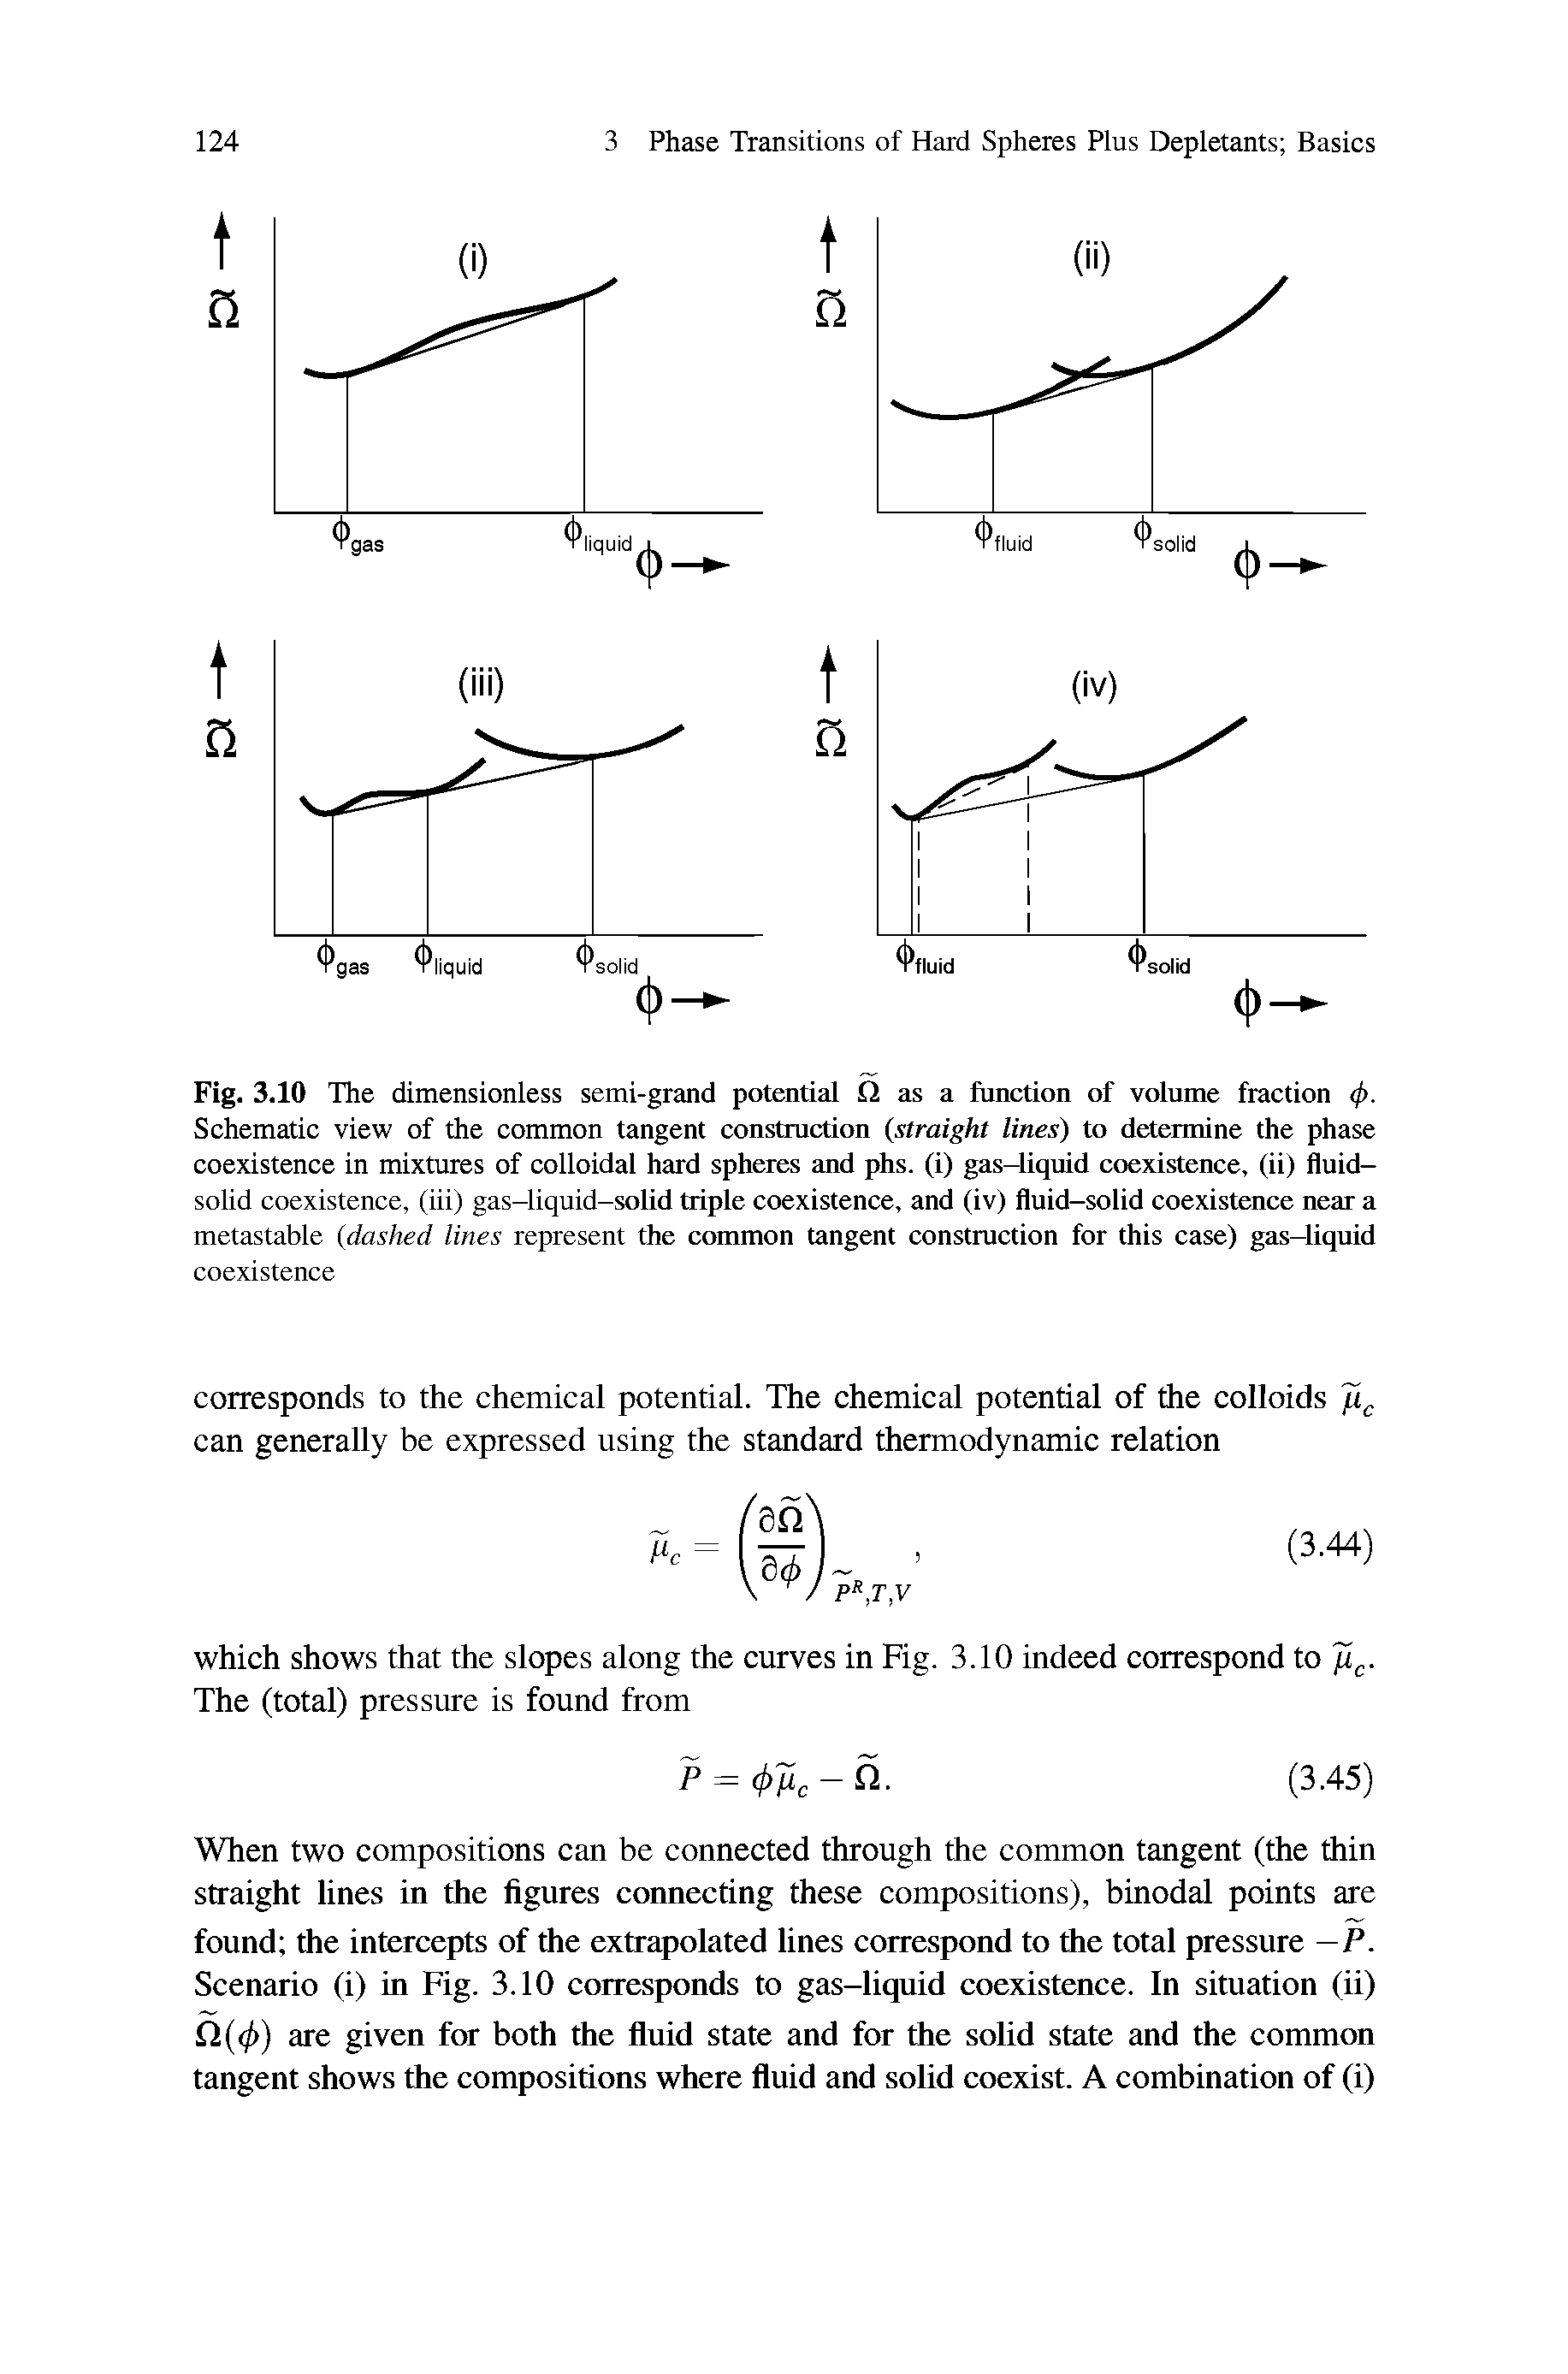 Fig. 3.10 The dimensionless semi-grand potential 12 as a function of volume fraction (j>. Schematic view of the common tangent construction (straight lines) to determine the phase coexistence in mixtures of colloidal hard spheres and phs. (i) gas-4iquid coexistence, (ii) fluid-solid coexistence, (iii) gas-liquid-solid triple coexistence, and (iv) fluid-solid coexistence near a metastable (dashed lines represent the common tangent construction for this case) gas-liquid coexistence...